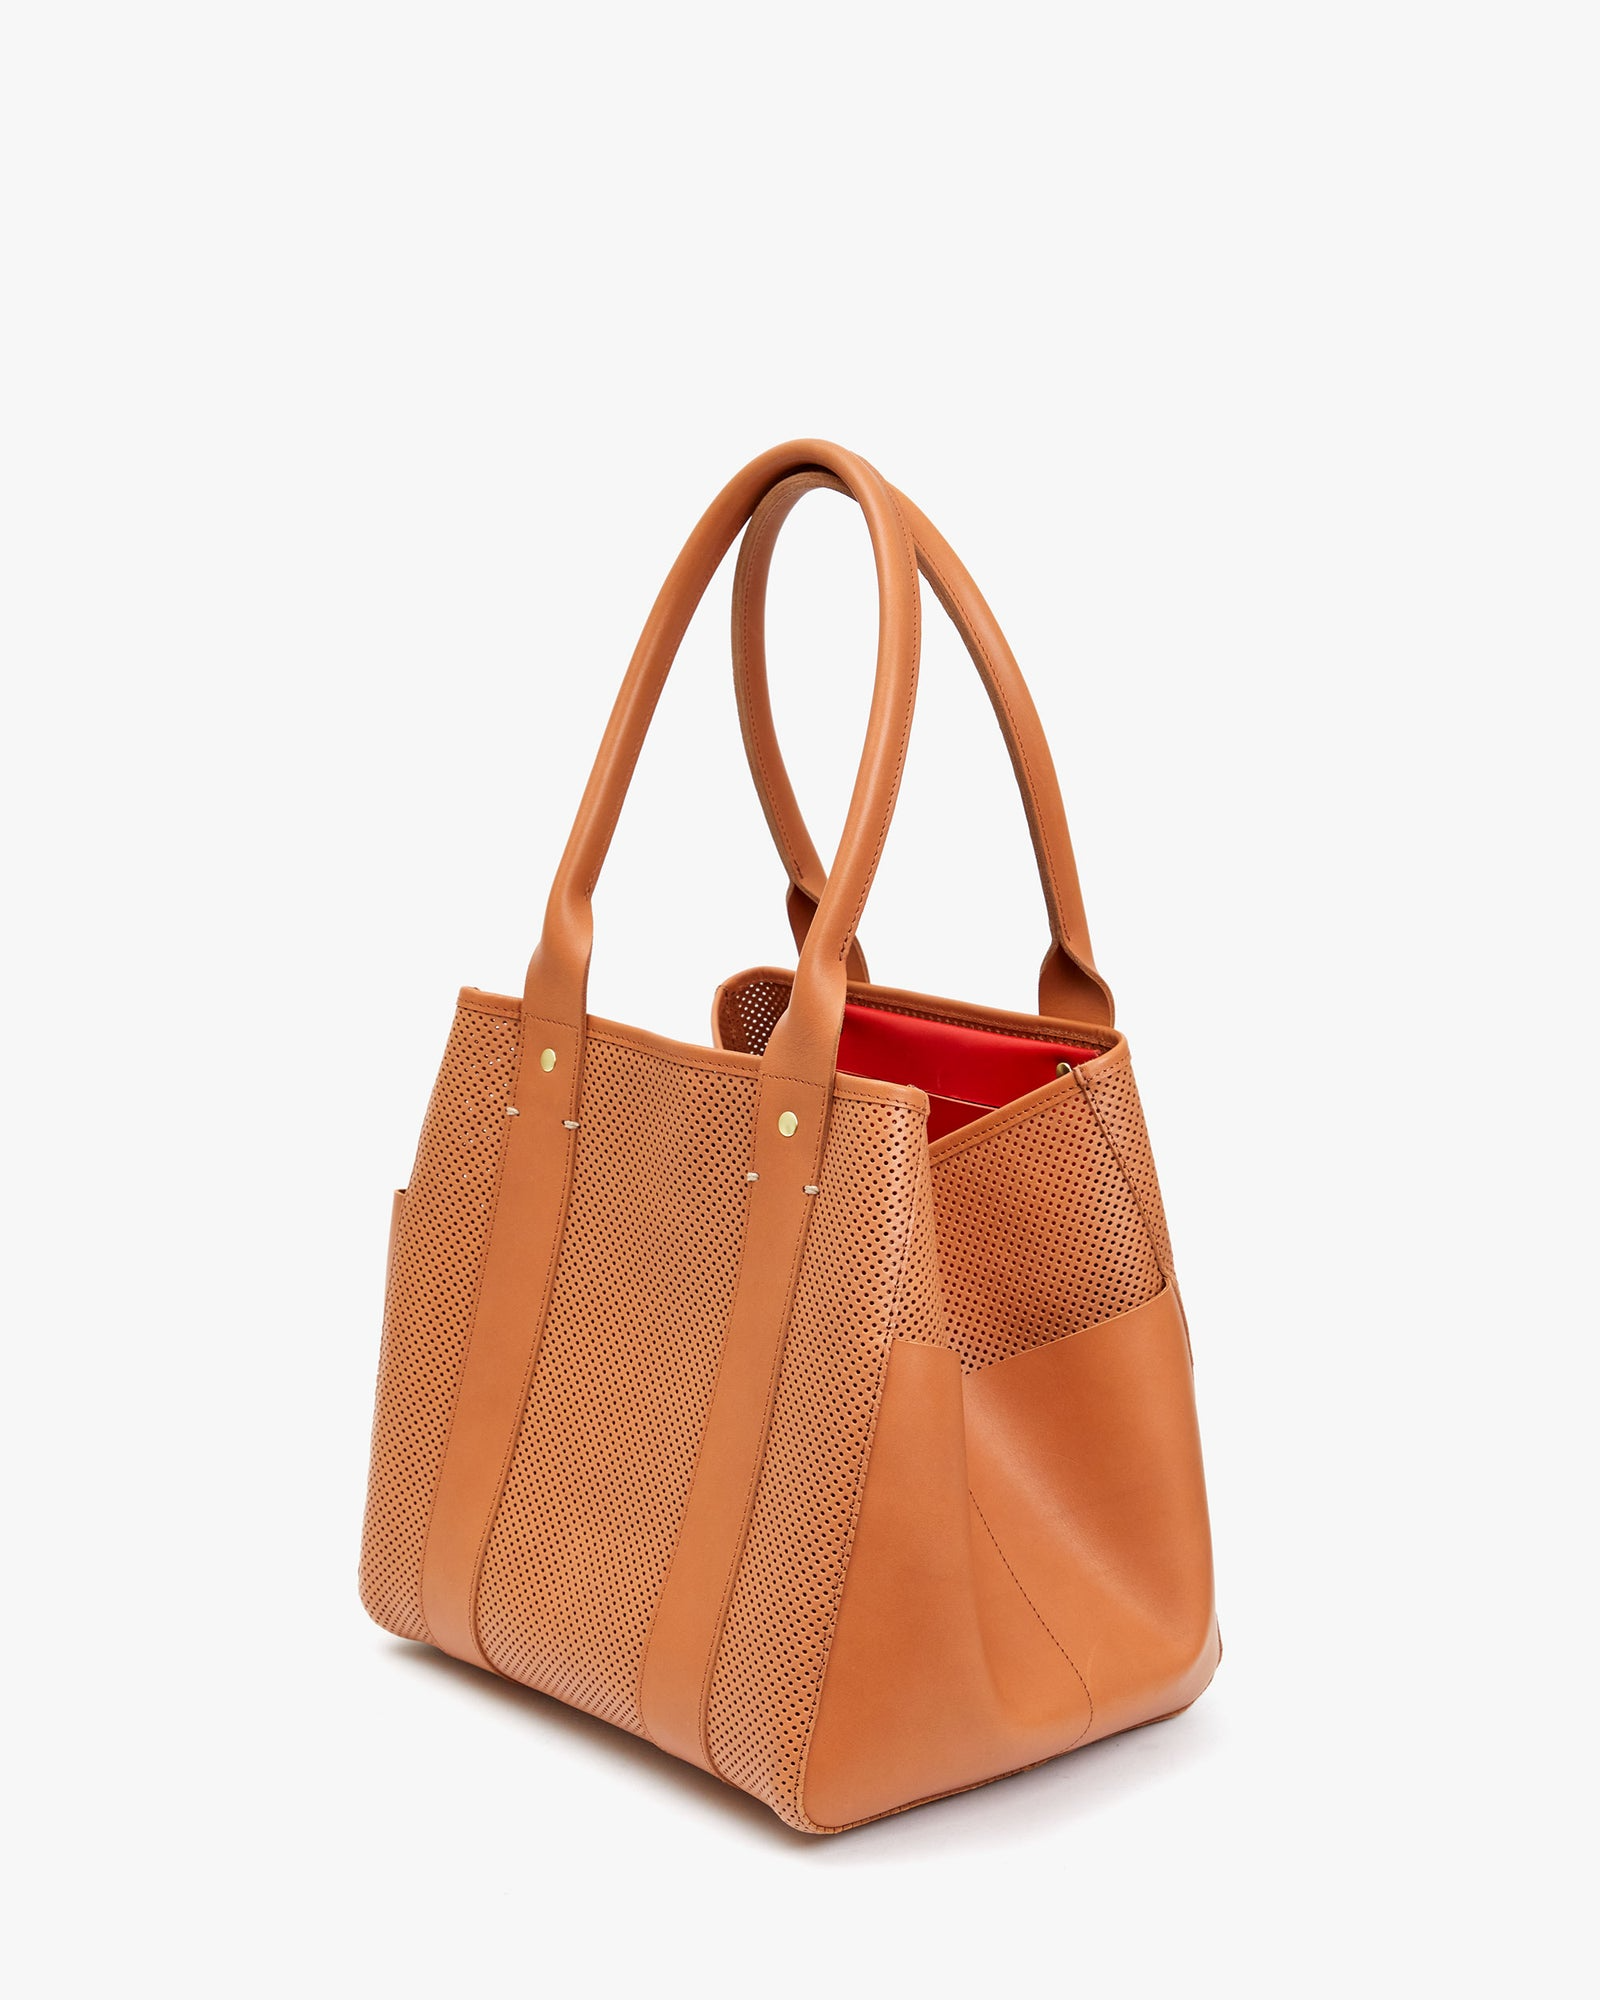 Clare V. Perforated Le Box Tote in Cuoio